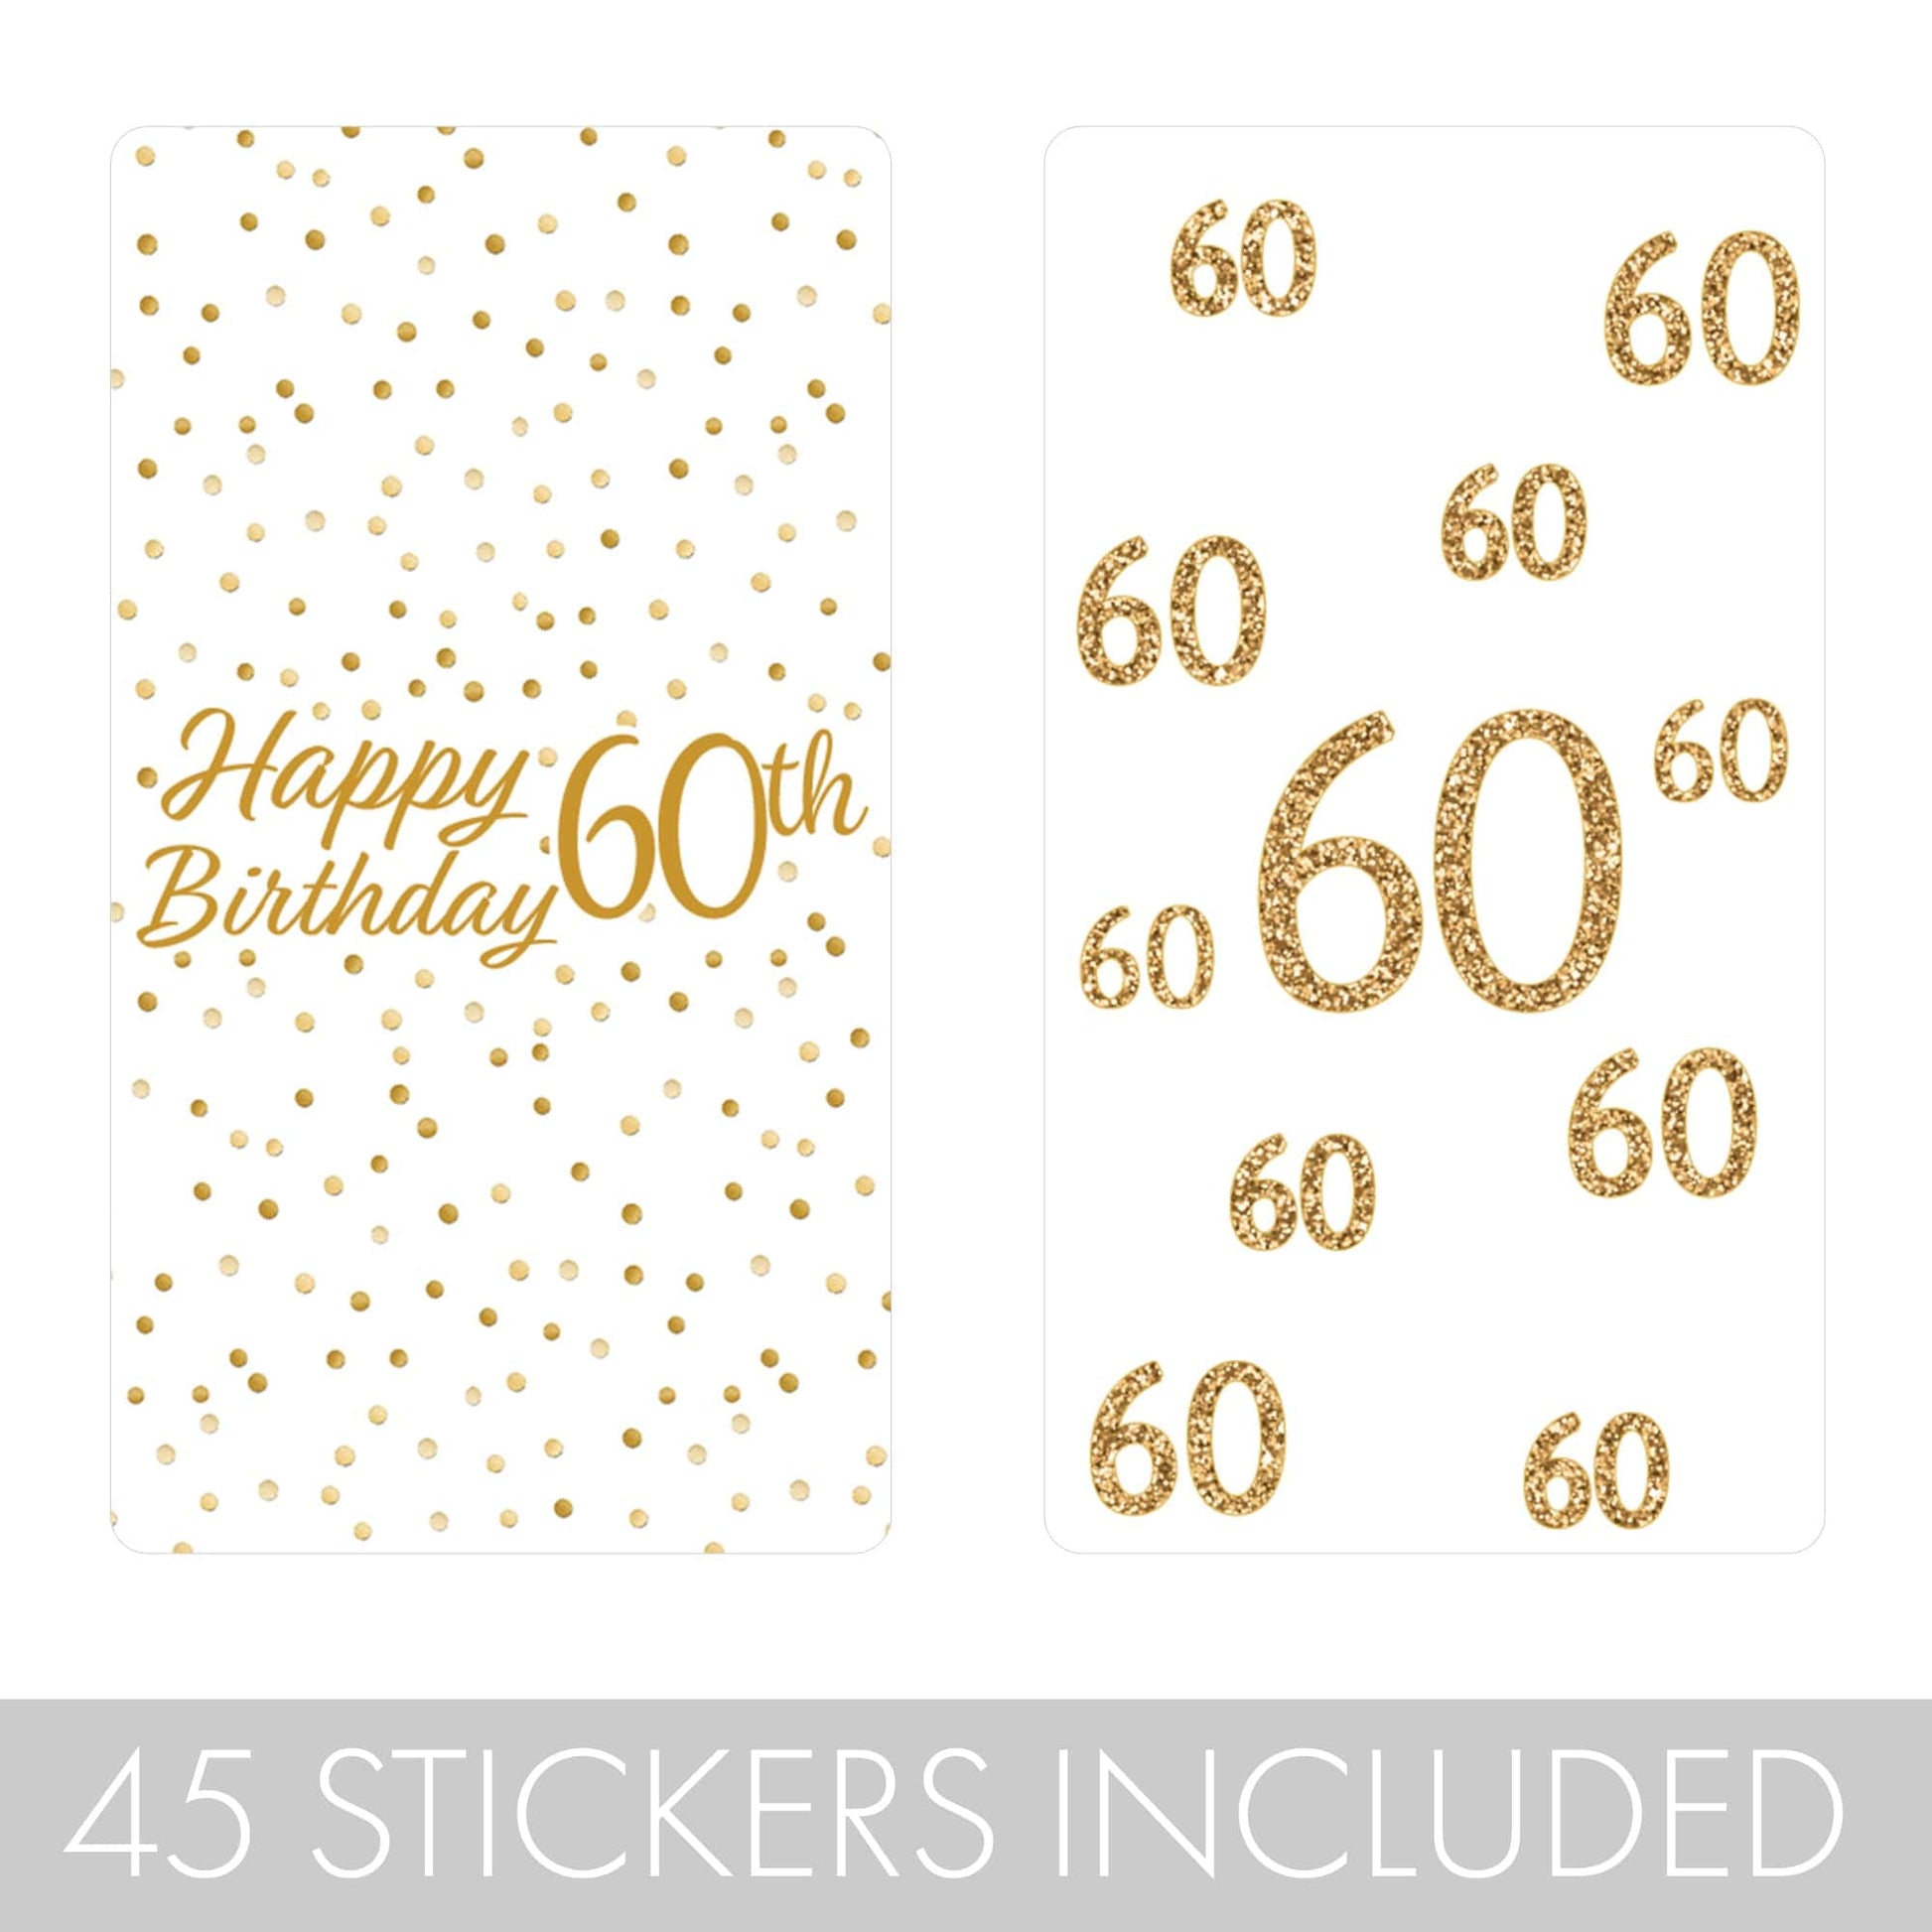  Add a special touch to your 60th birthday party with these white and gold mini candy bar stickers. 